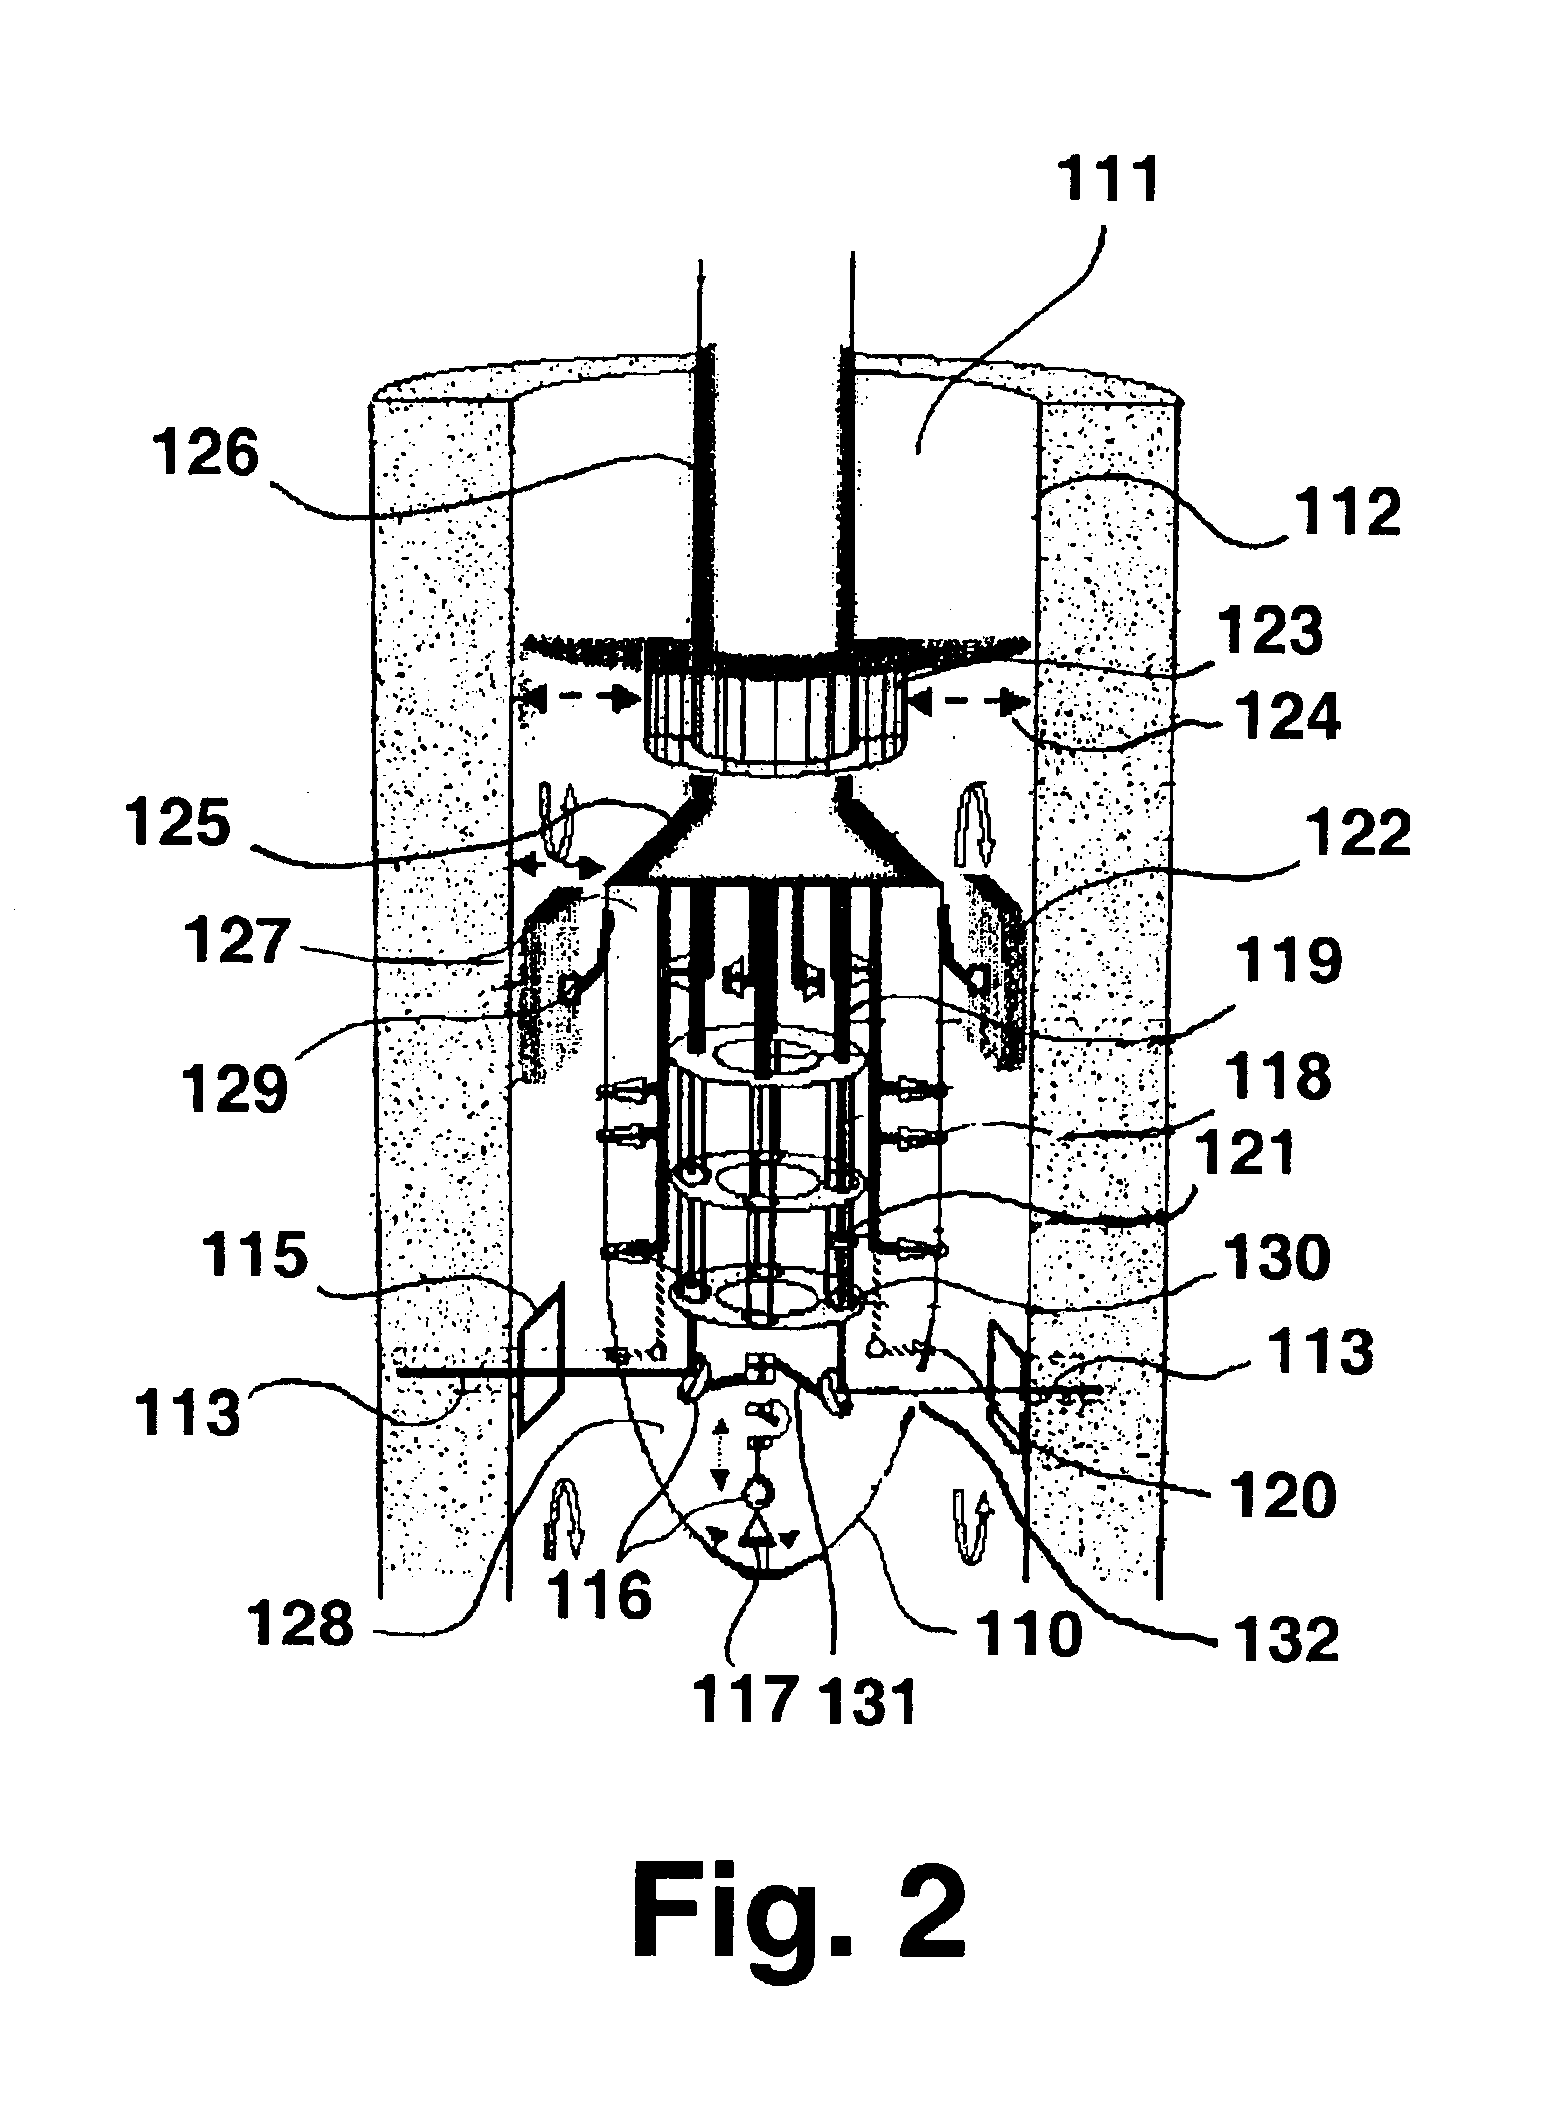 Laser wellbore completion apparatus and method